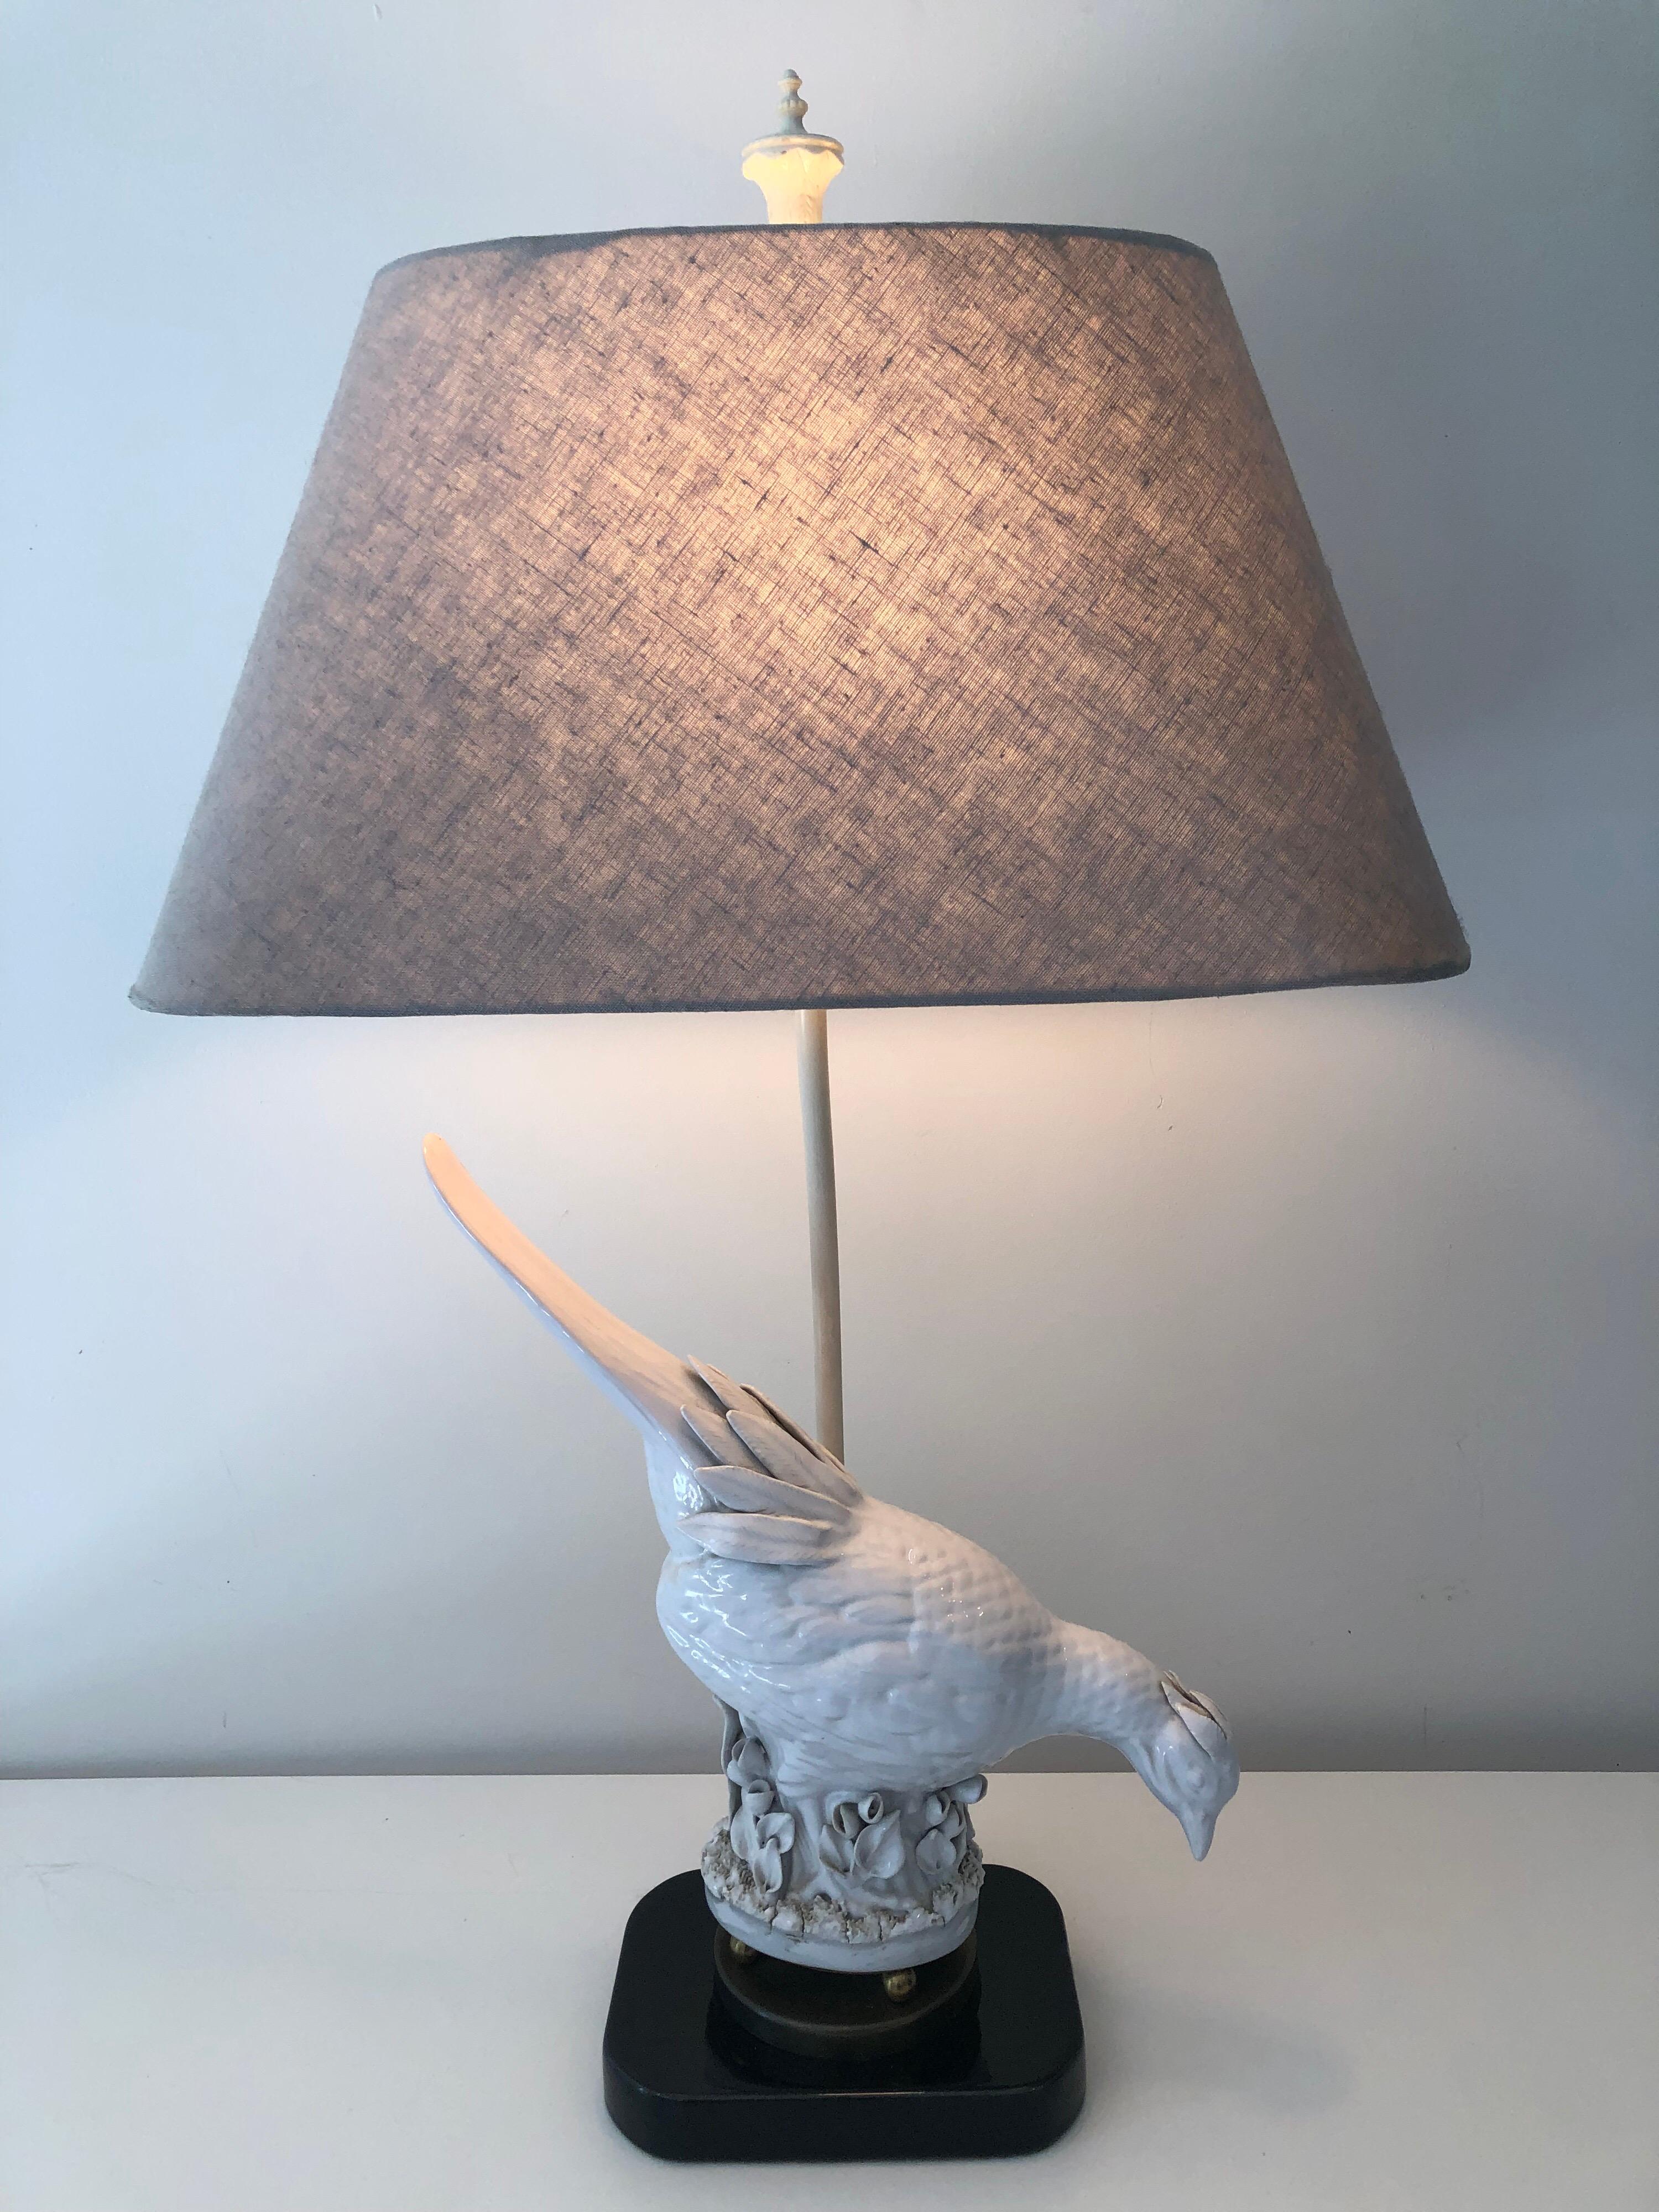 A vintage Italian Blanc de Chine Pheasant table lamp. Mounted on black glazed porcelain base. Shade for display purposes only.